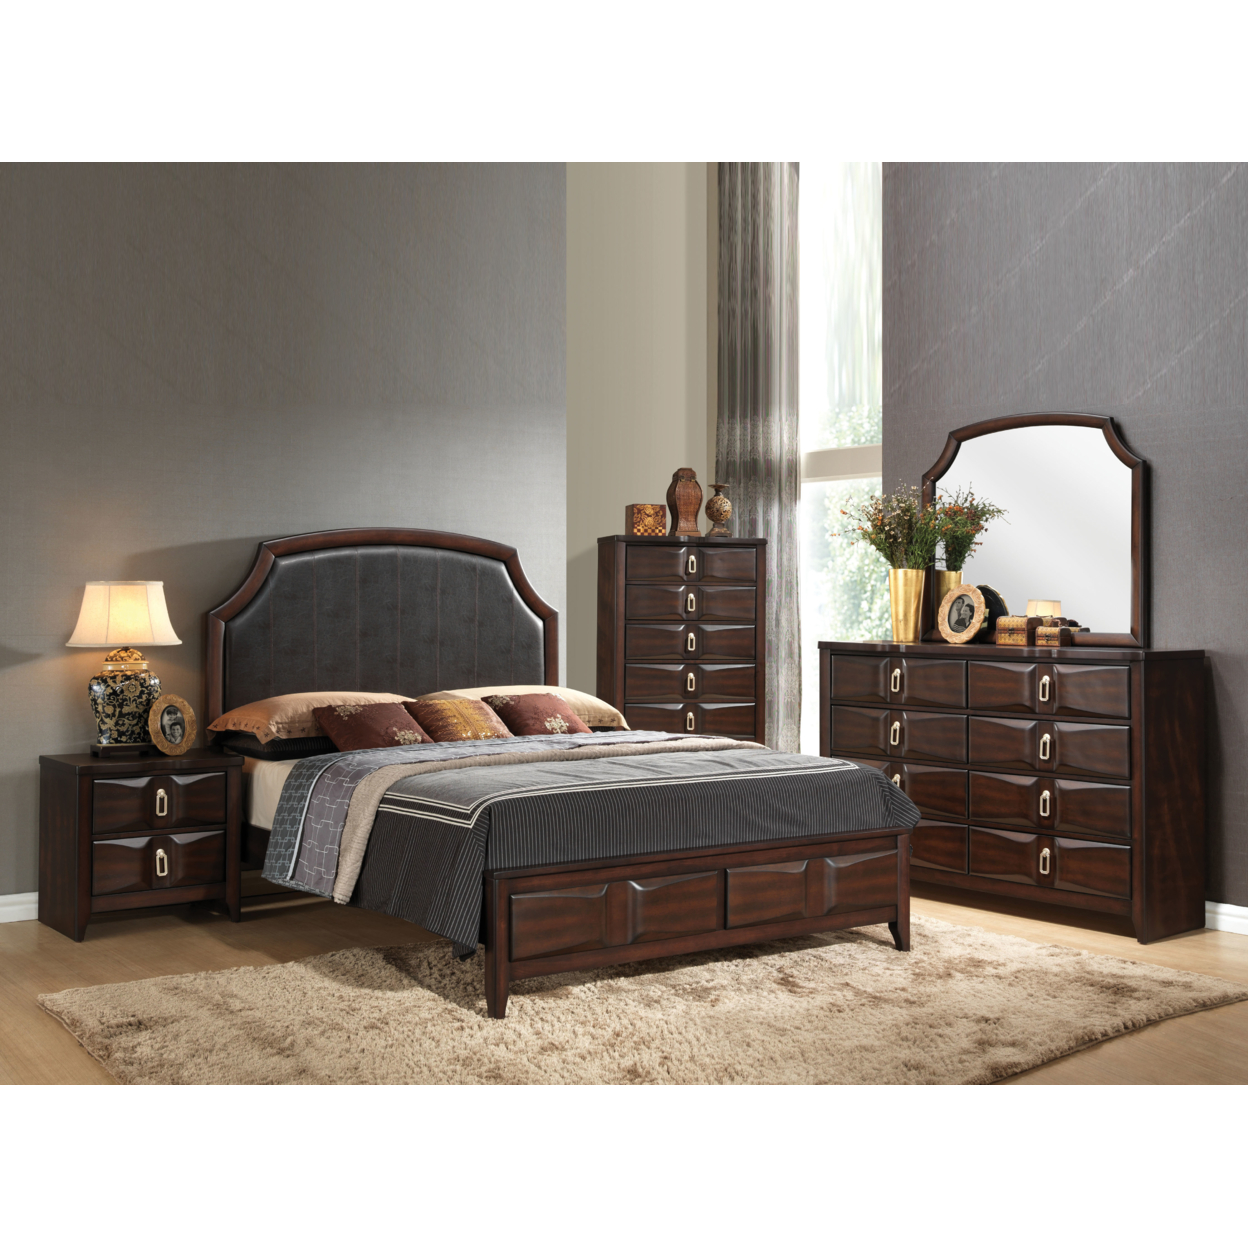 Classy And Stylish Queen Size Panel Bed, Brown And Grey- Saltoro Sherpi